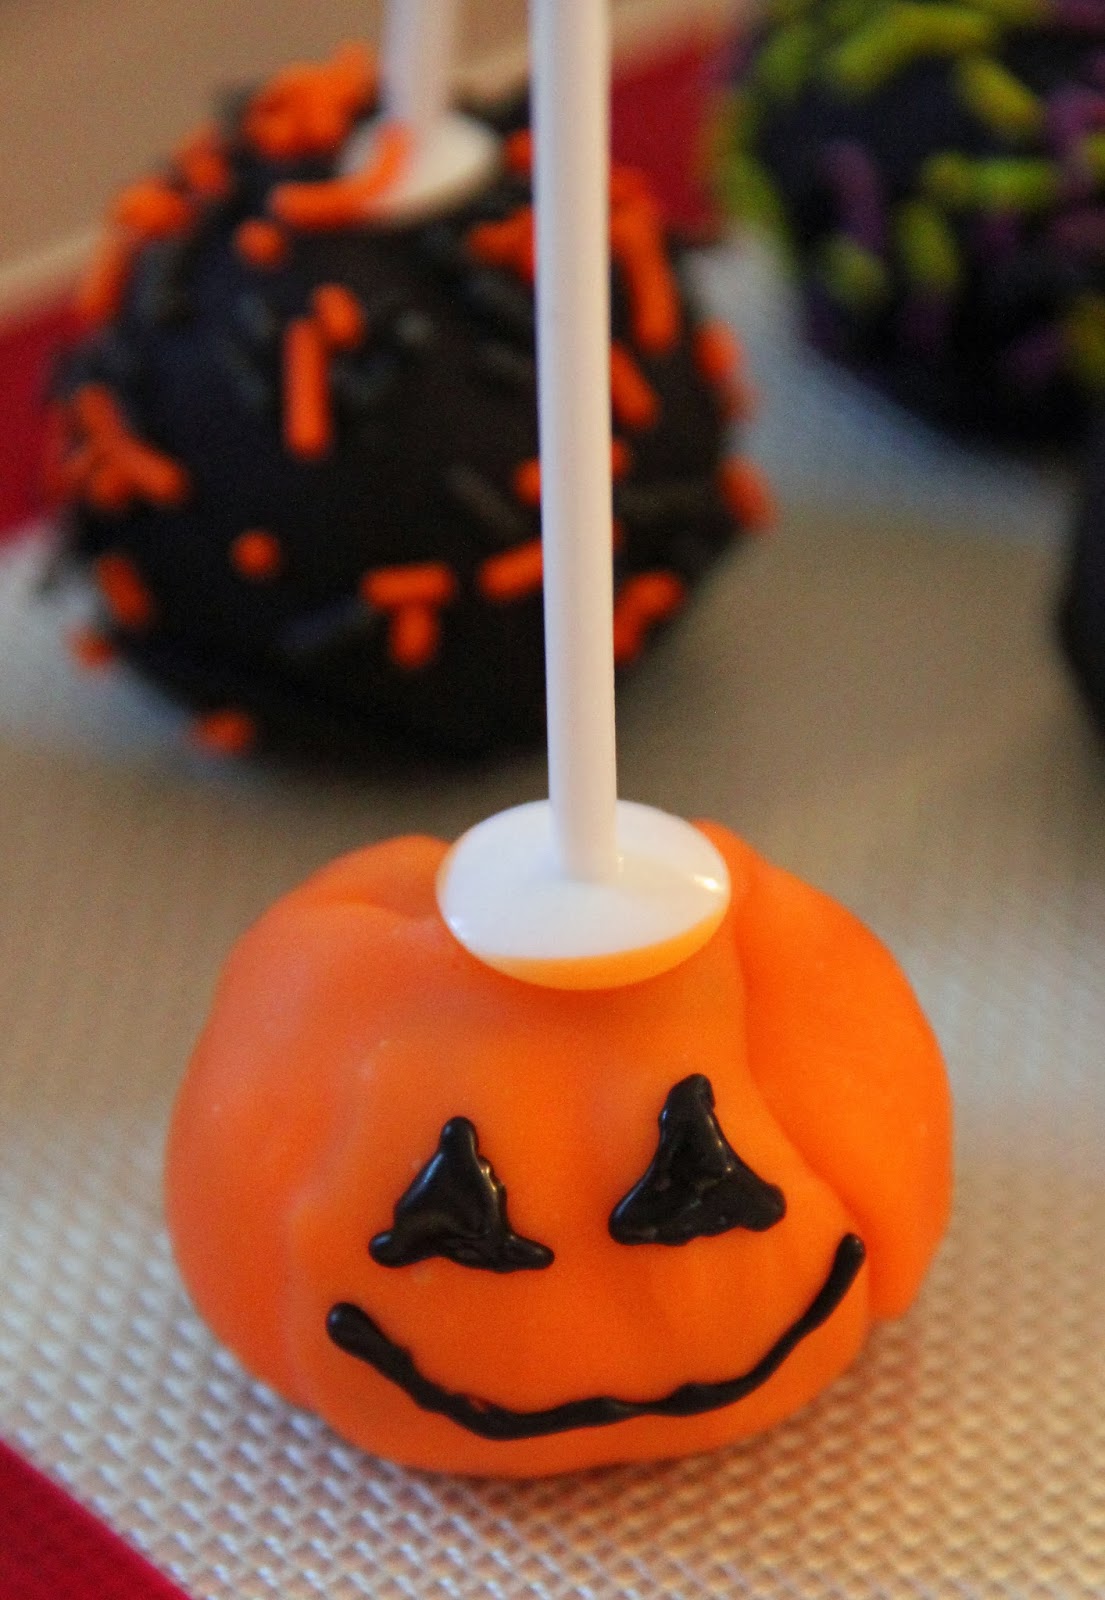 spooky cakes Cake pops are always a hit at Halloween. These Jack O'Lantern cuties 